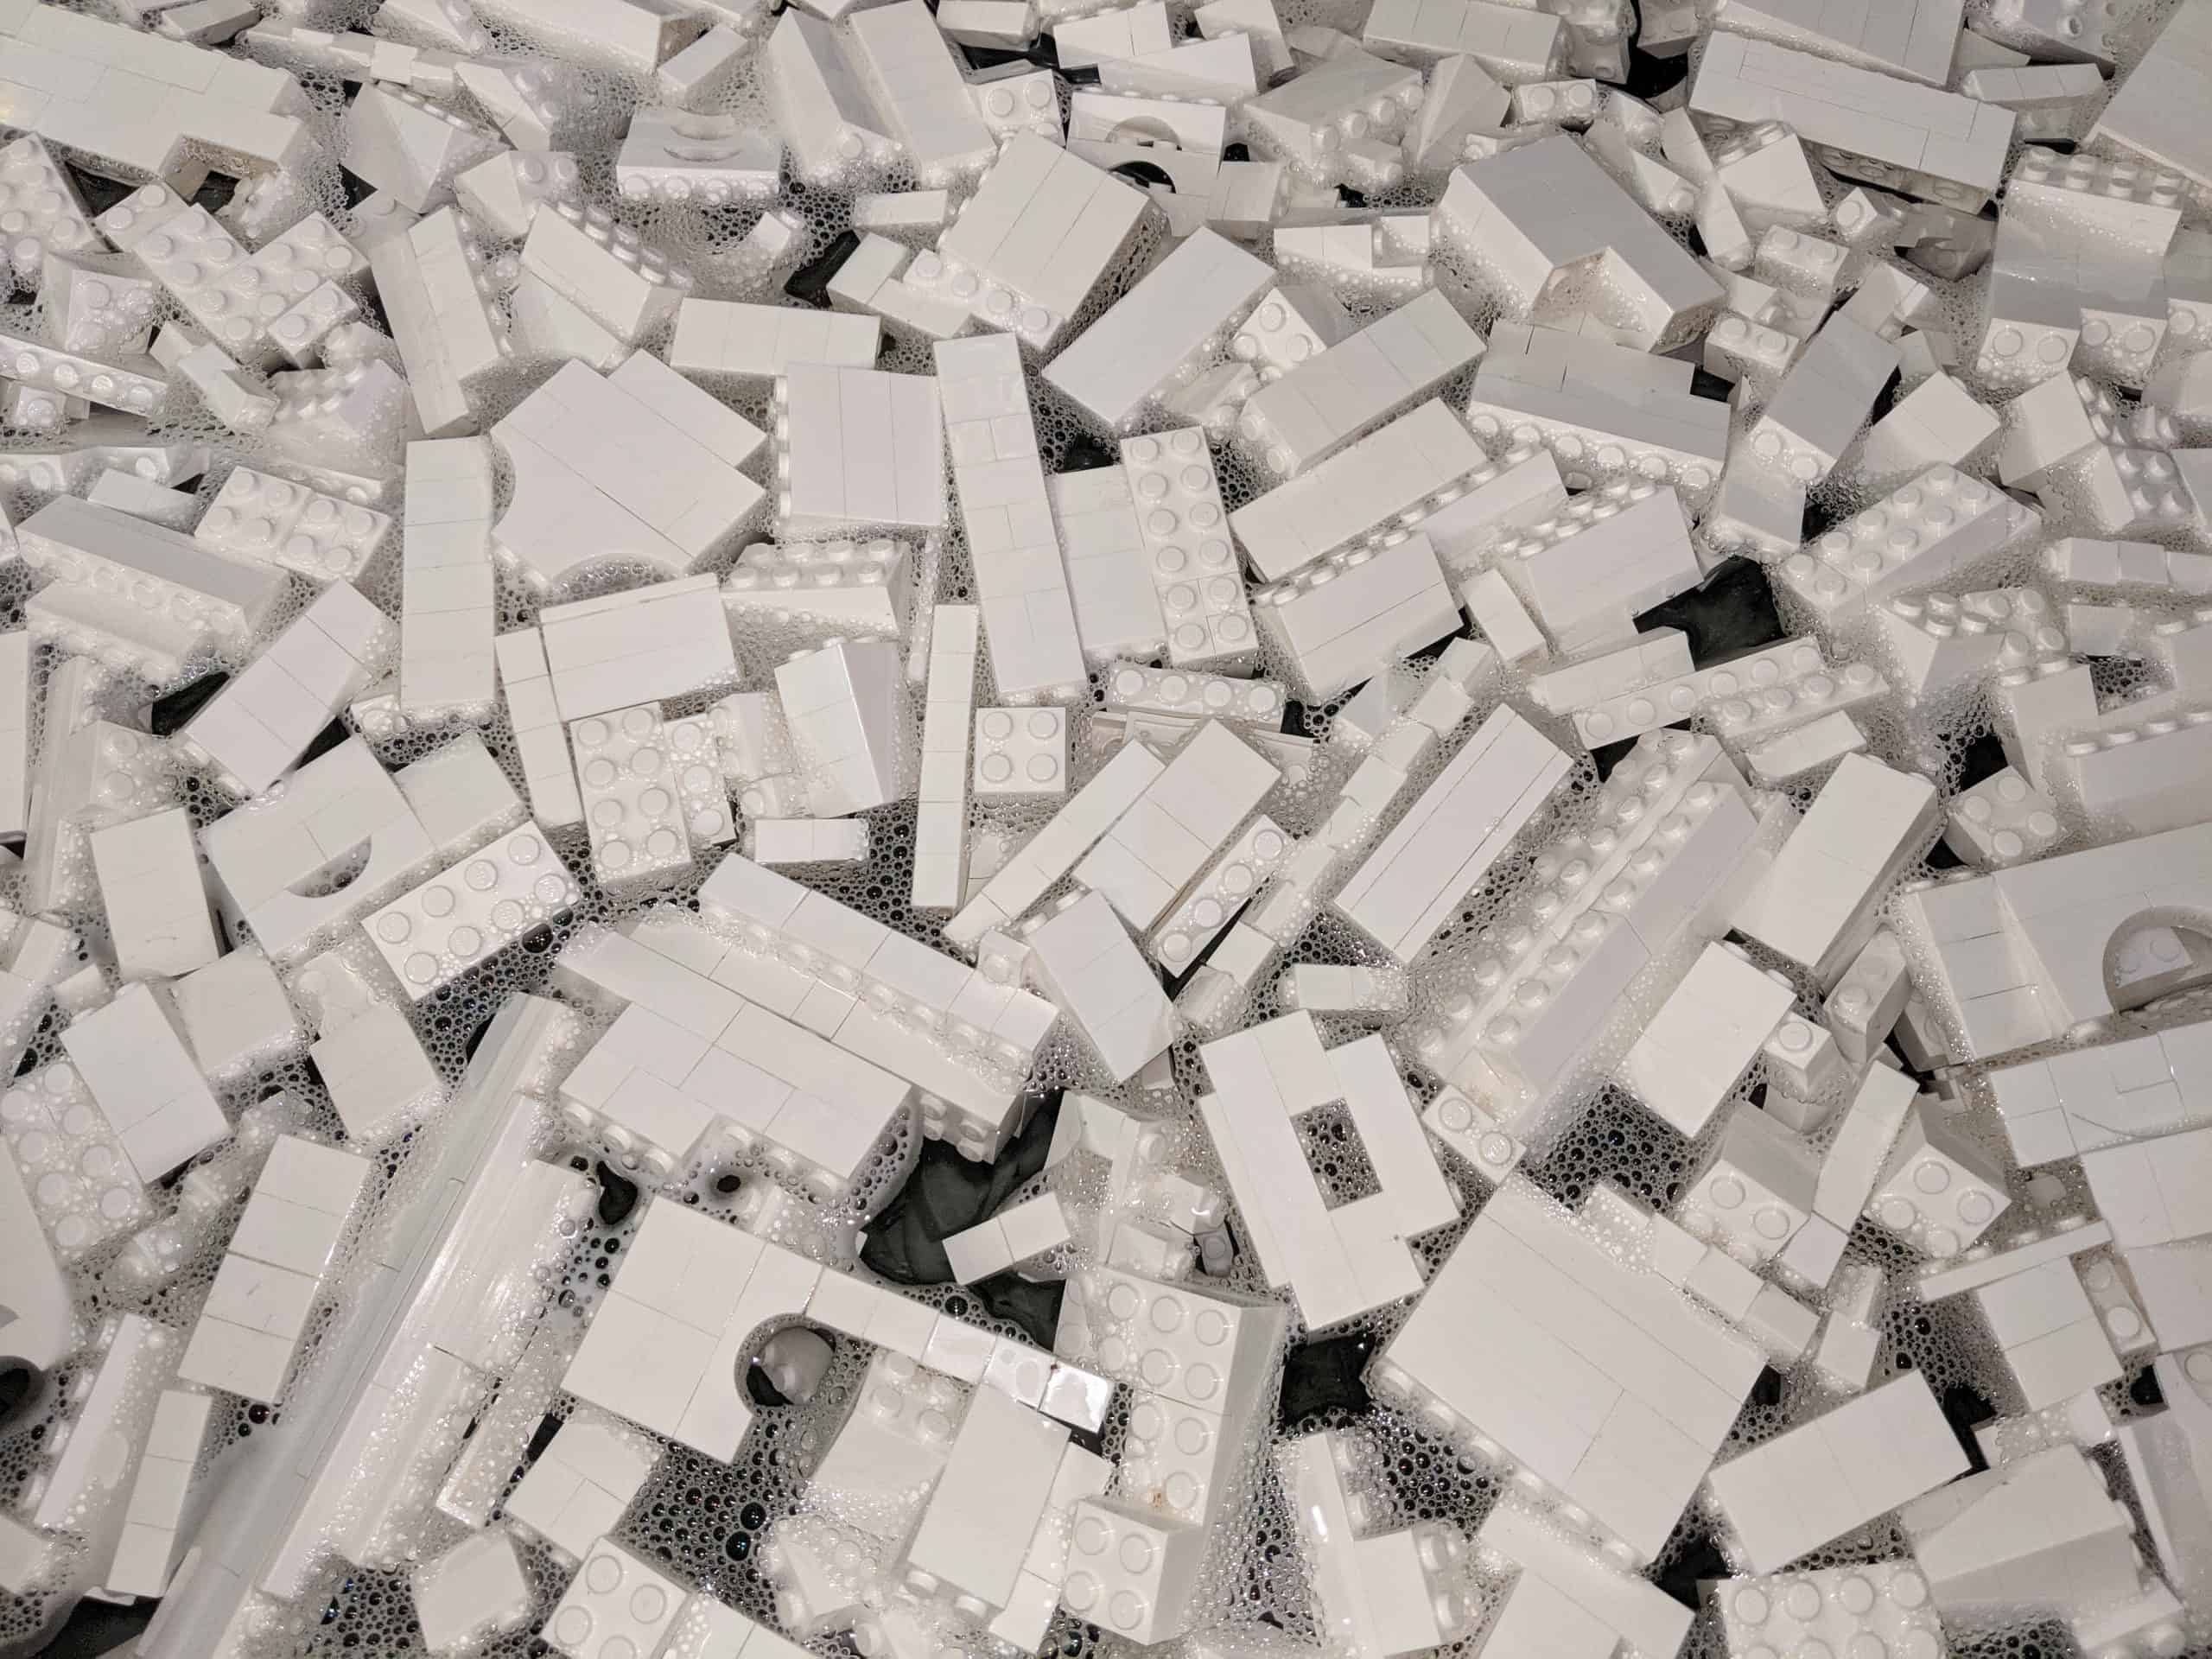 How to Clean 1 Million Pieces of Lego